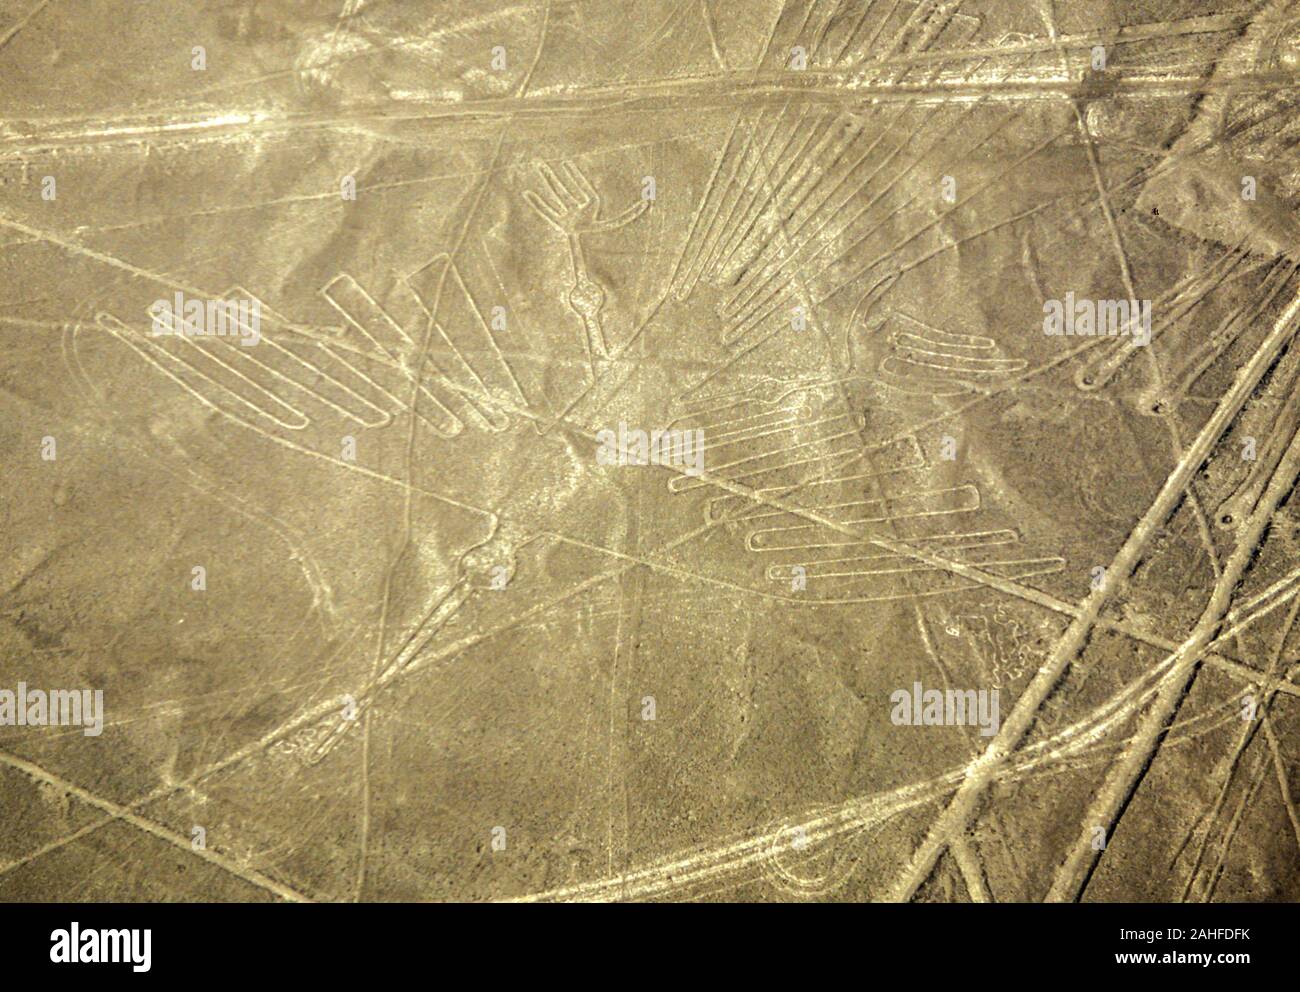 Aerial view of the Condor. The Nazca Lines are a group of very large geoglyphs formed by depressions or shallow incisions made in the soil of the Nazc Stock Photo